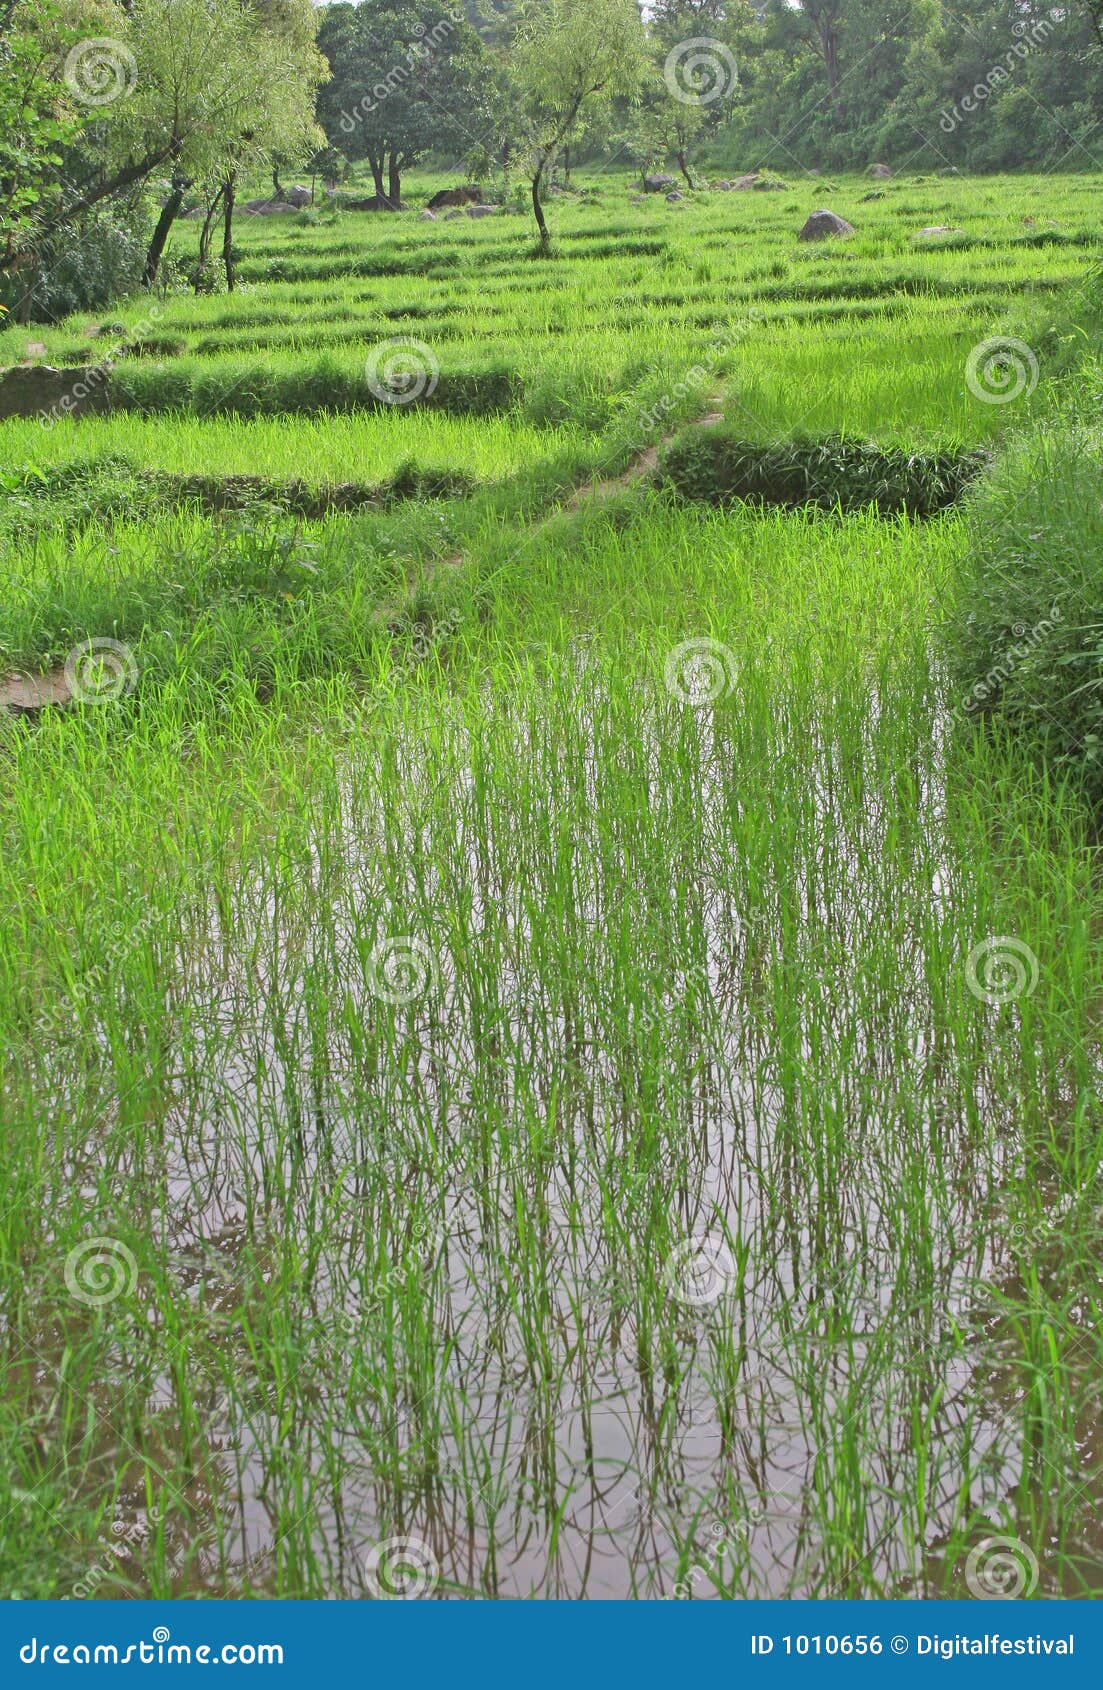 lush green rice fields & paddy cultivation